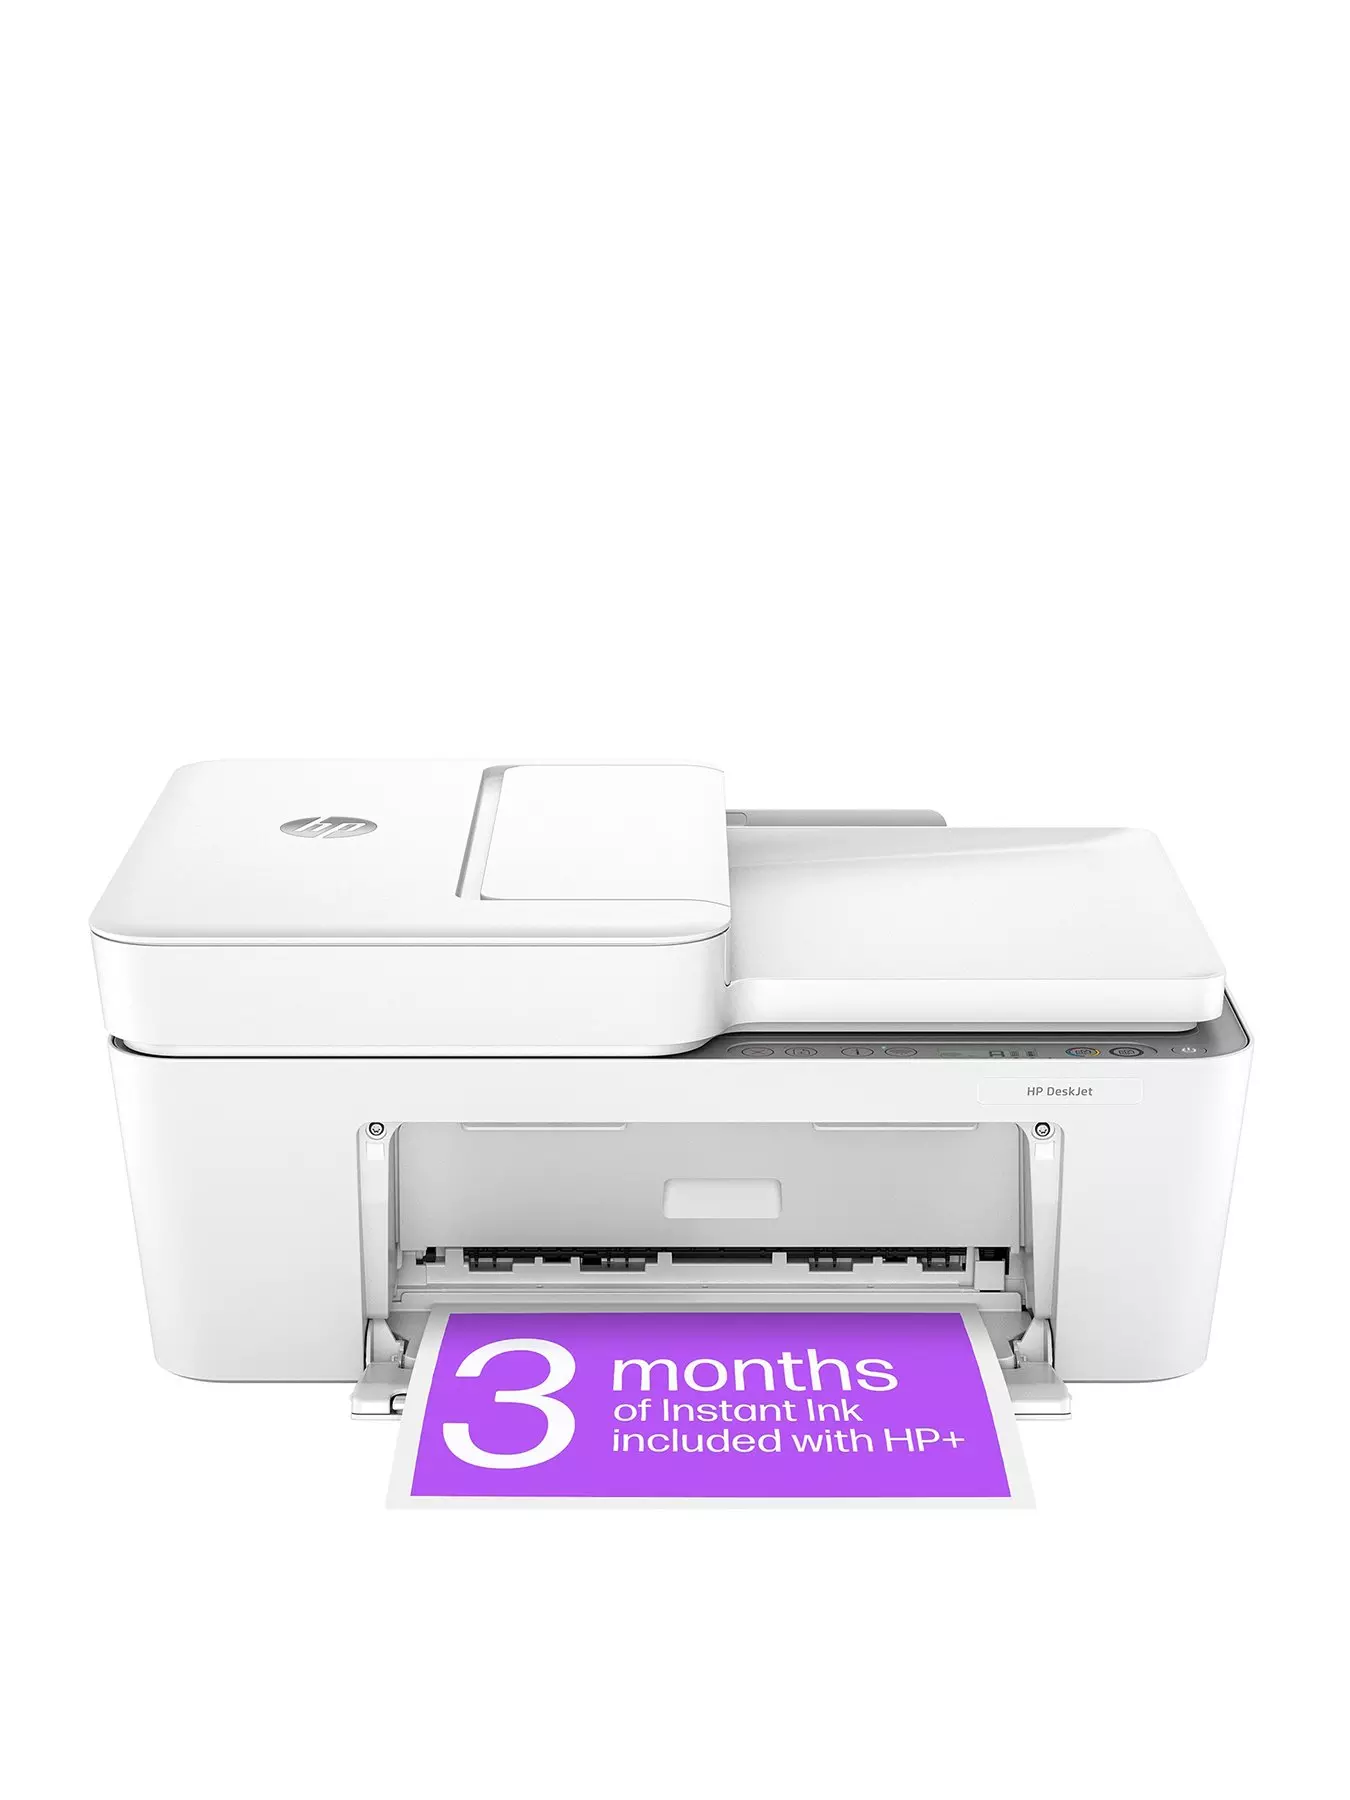 Sotel  HP DeskJet HP 2720e All-in-One Printer, Color, Printer for Home,  Print, copy, scan, Wireless; HP+; HP Instant Ink eligible; Print from phone  or tablet